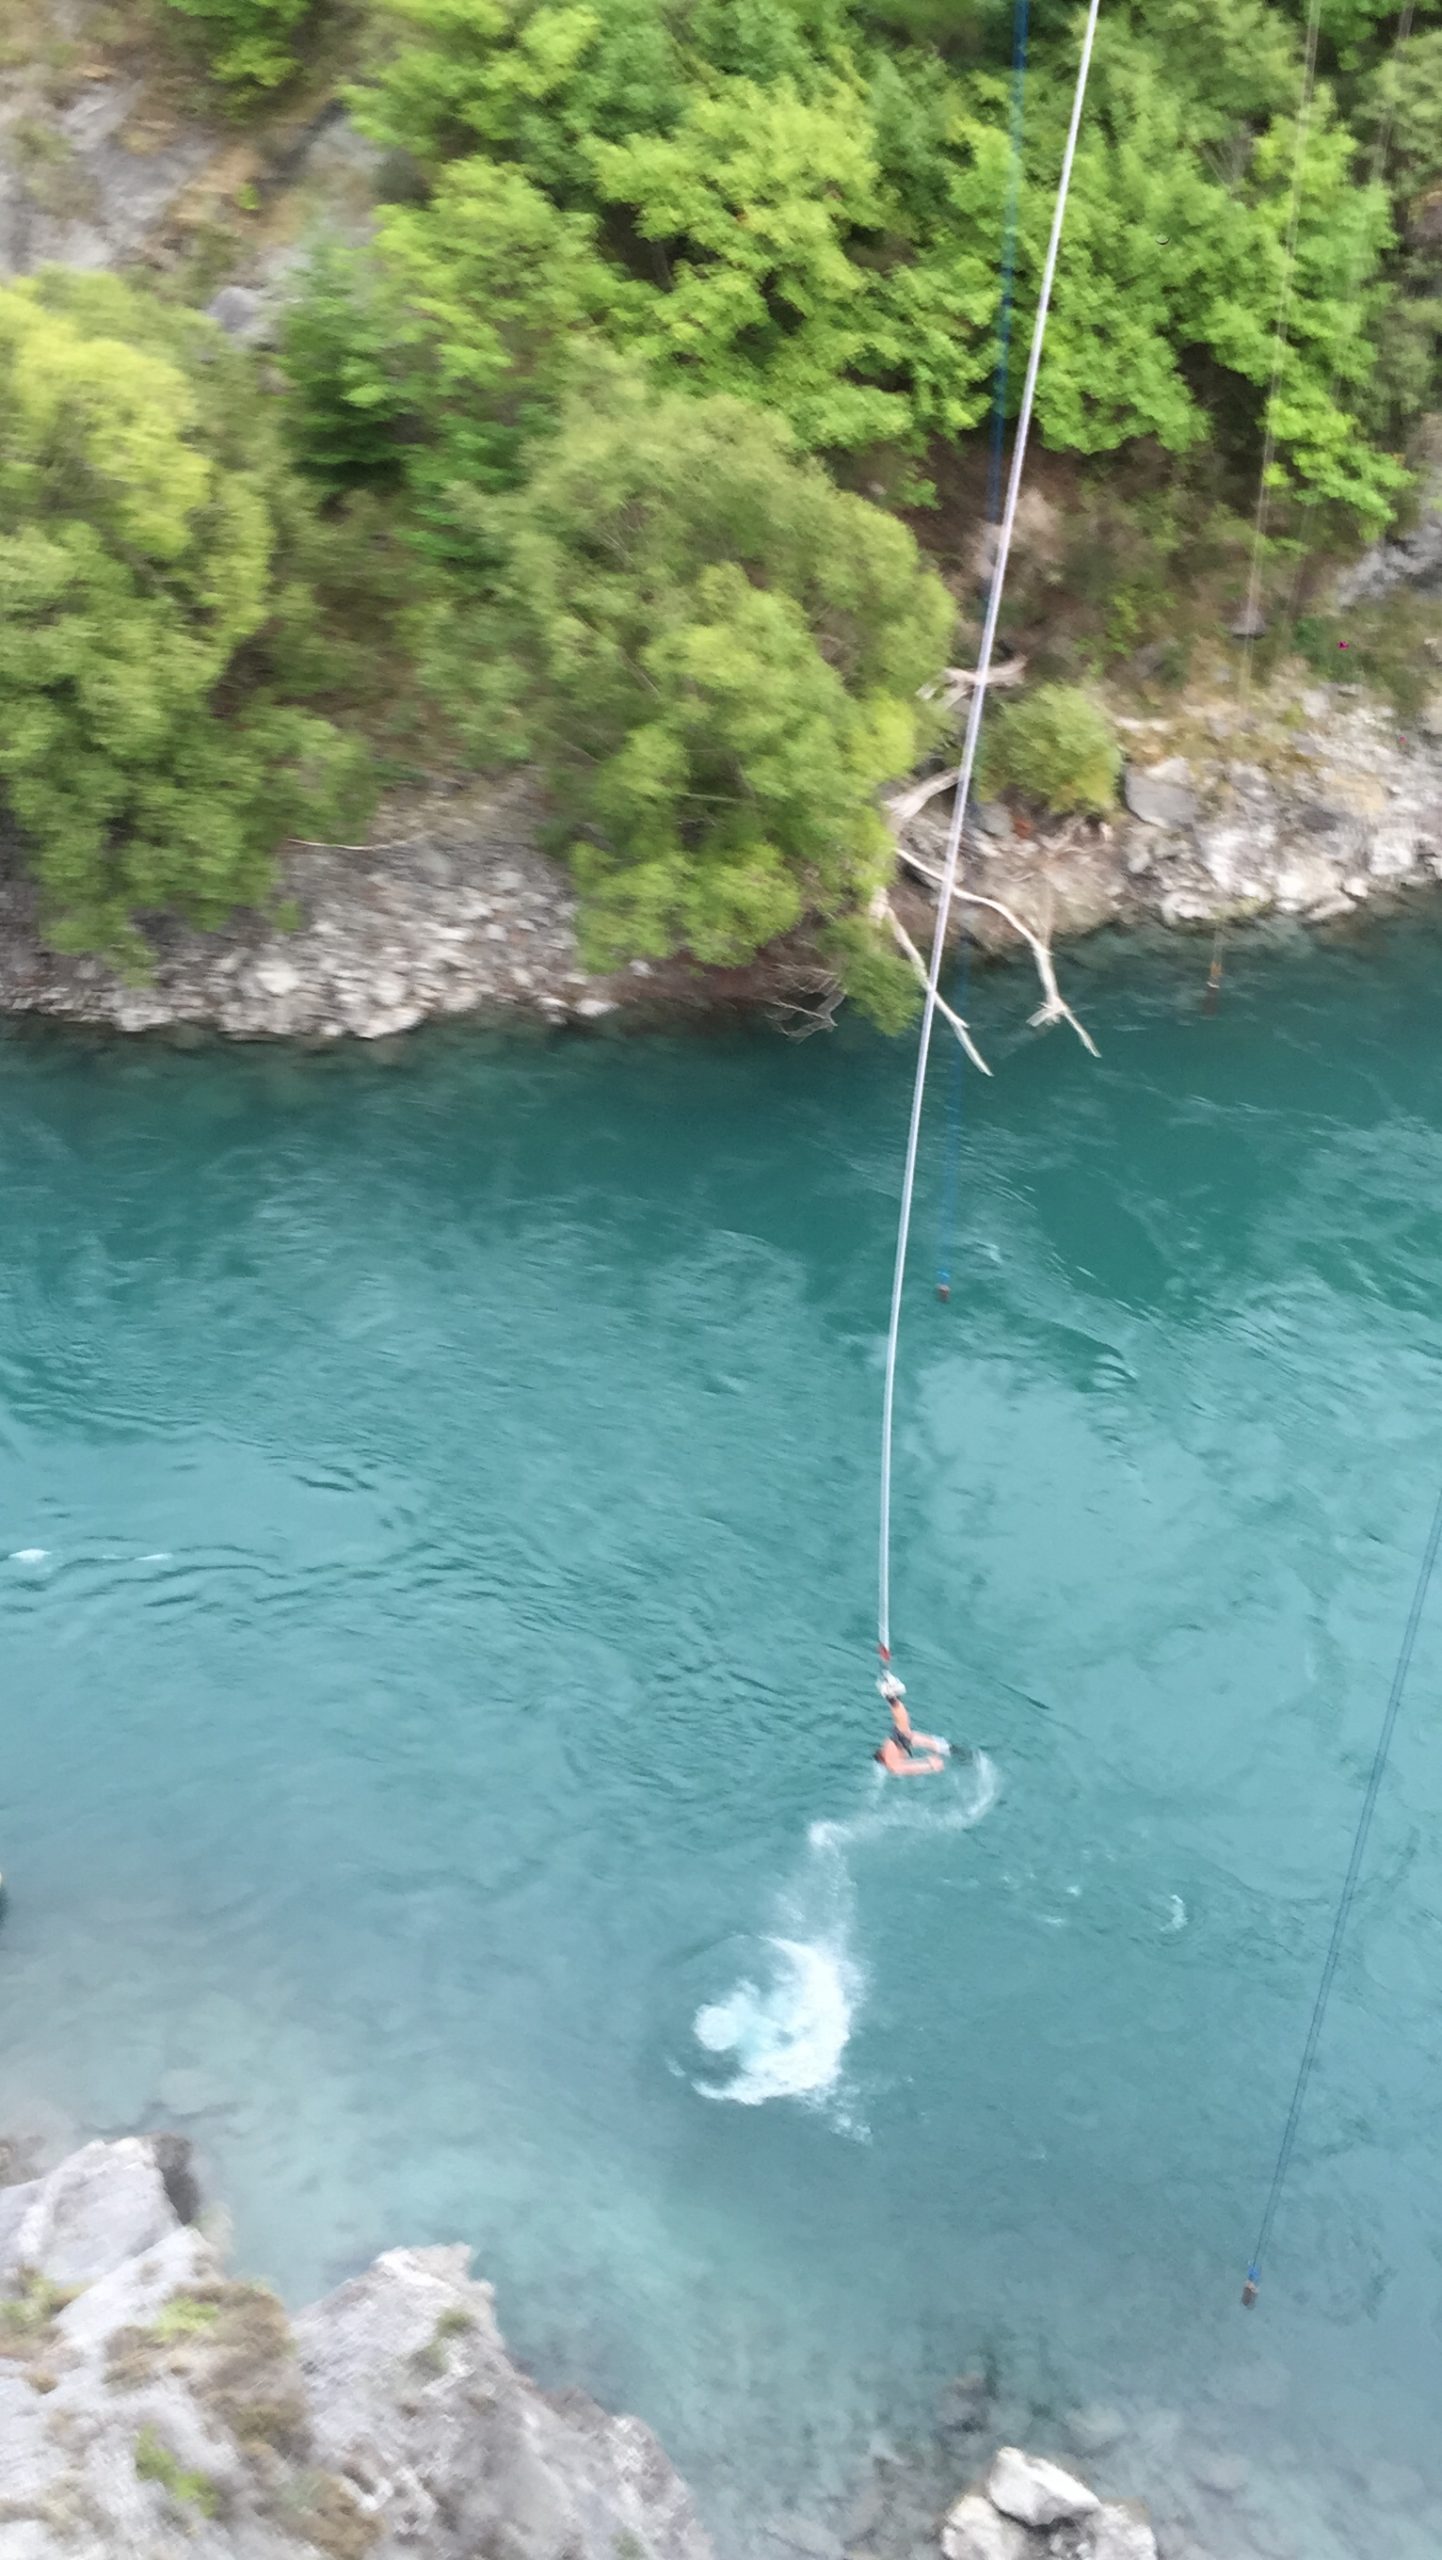 David Simpson taking the plunge into the river during bungee jump in Kawarau, New Zealand. My first and favourite bungee jump